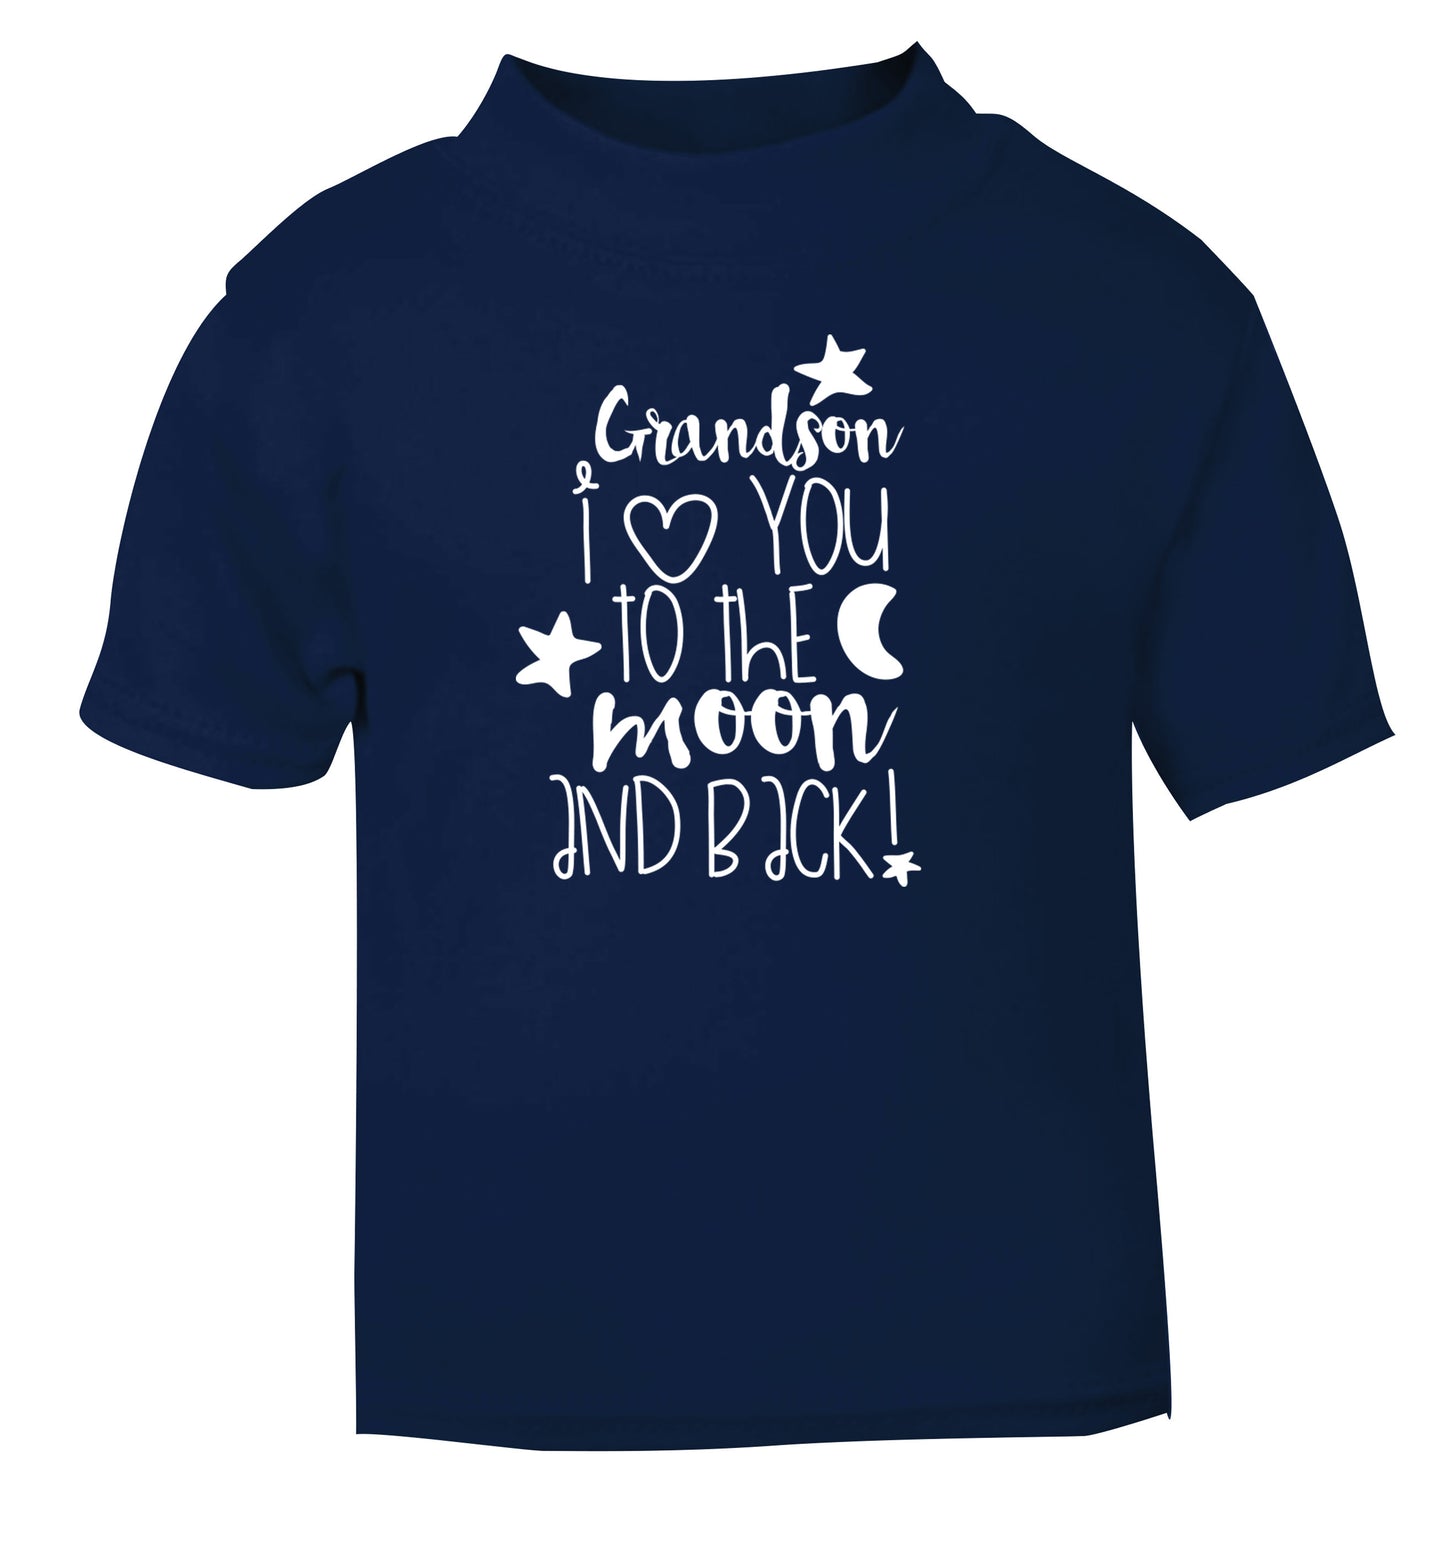 Grandson I love you to the moon and back navy Baby Toddler Tshirt 2 Years